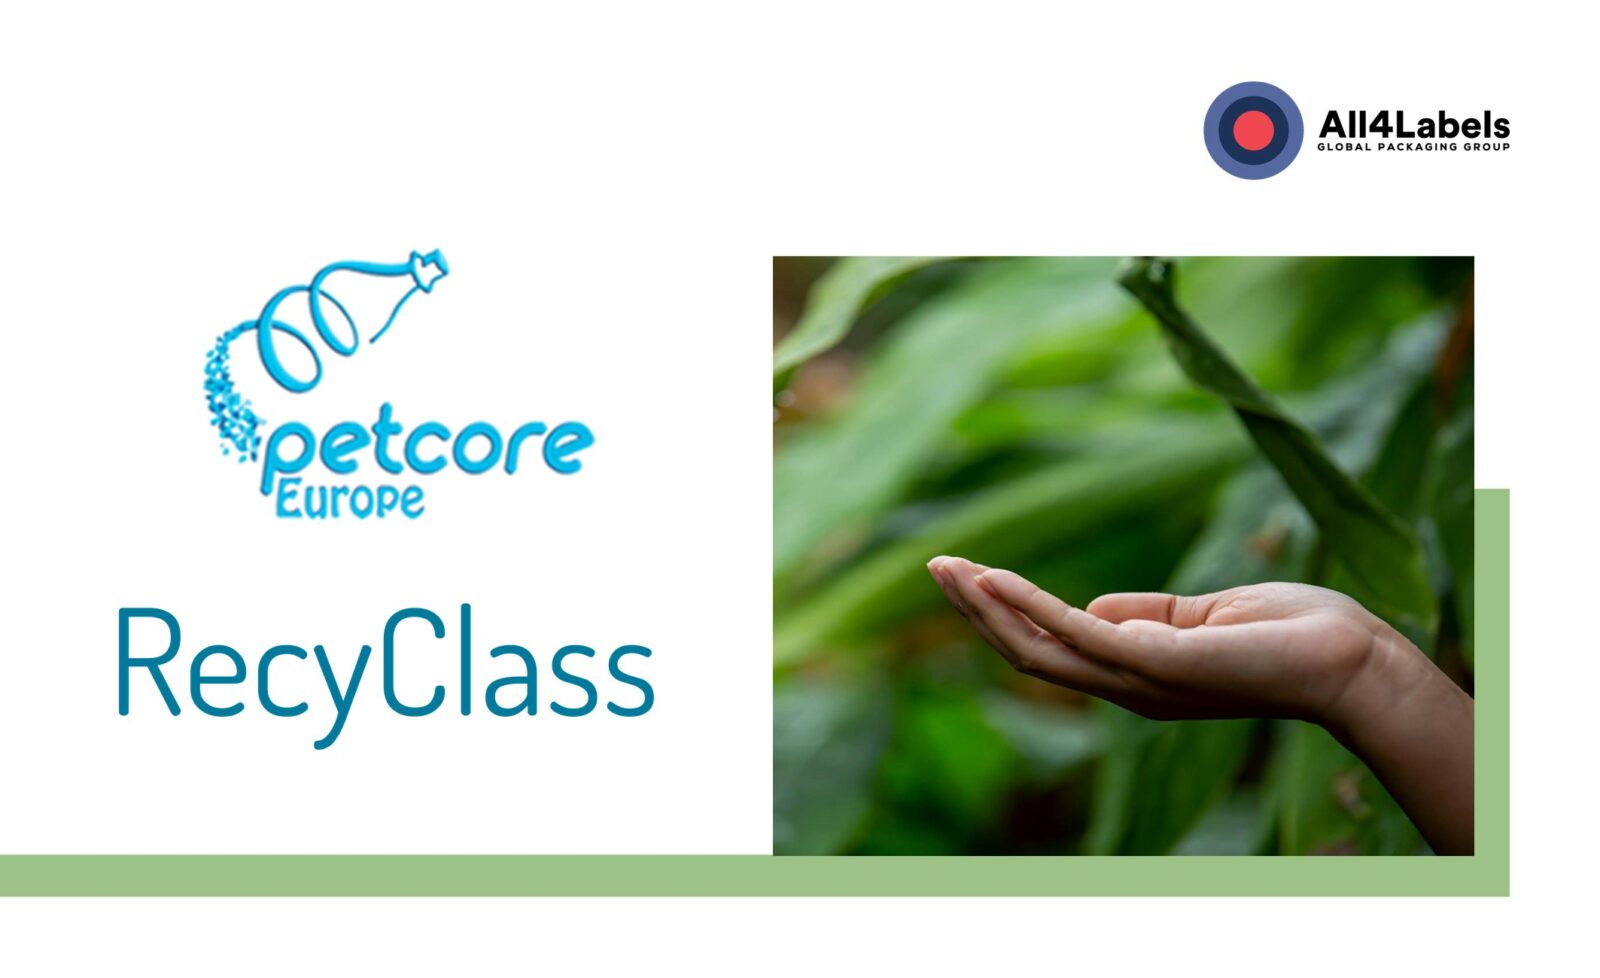 All4Labels joins the initiatives Petcore and RecyClass as part of its sustainability strategy